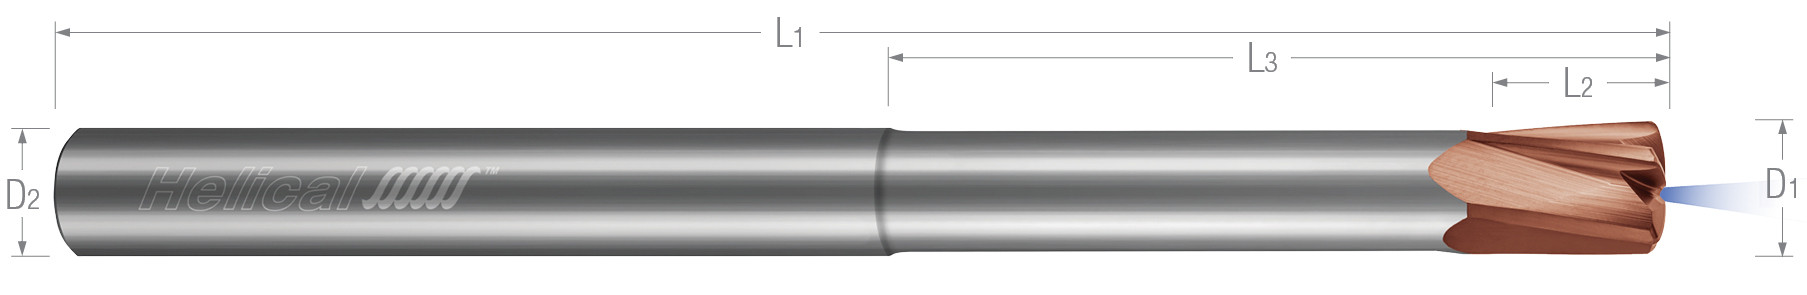 High Feed End Mills-Steels up to 45 Rc-Variable Pitch-Coolant Through-Reduced Neck